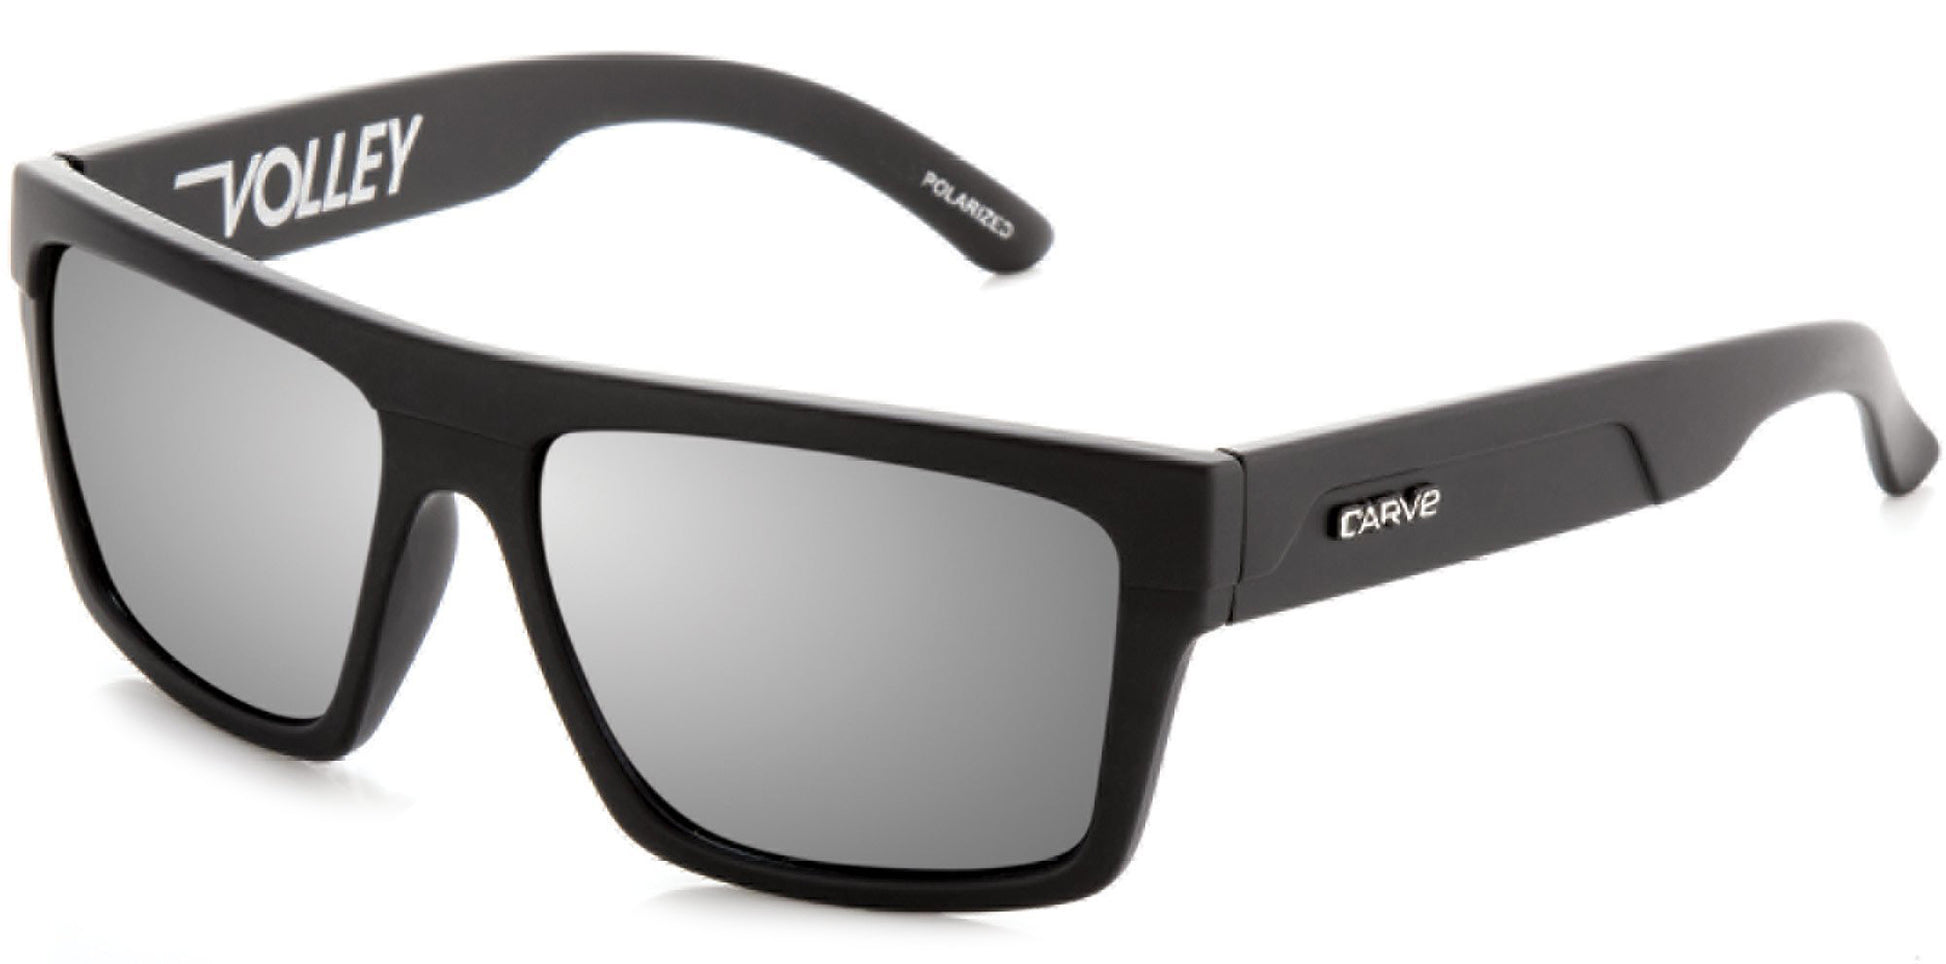 Carve Volley Sunglasses - Ast Colors Polarized Sunglasses Matte Black / Silver Injected Silver Polarized